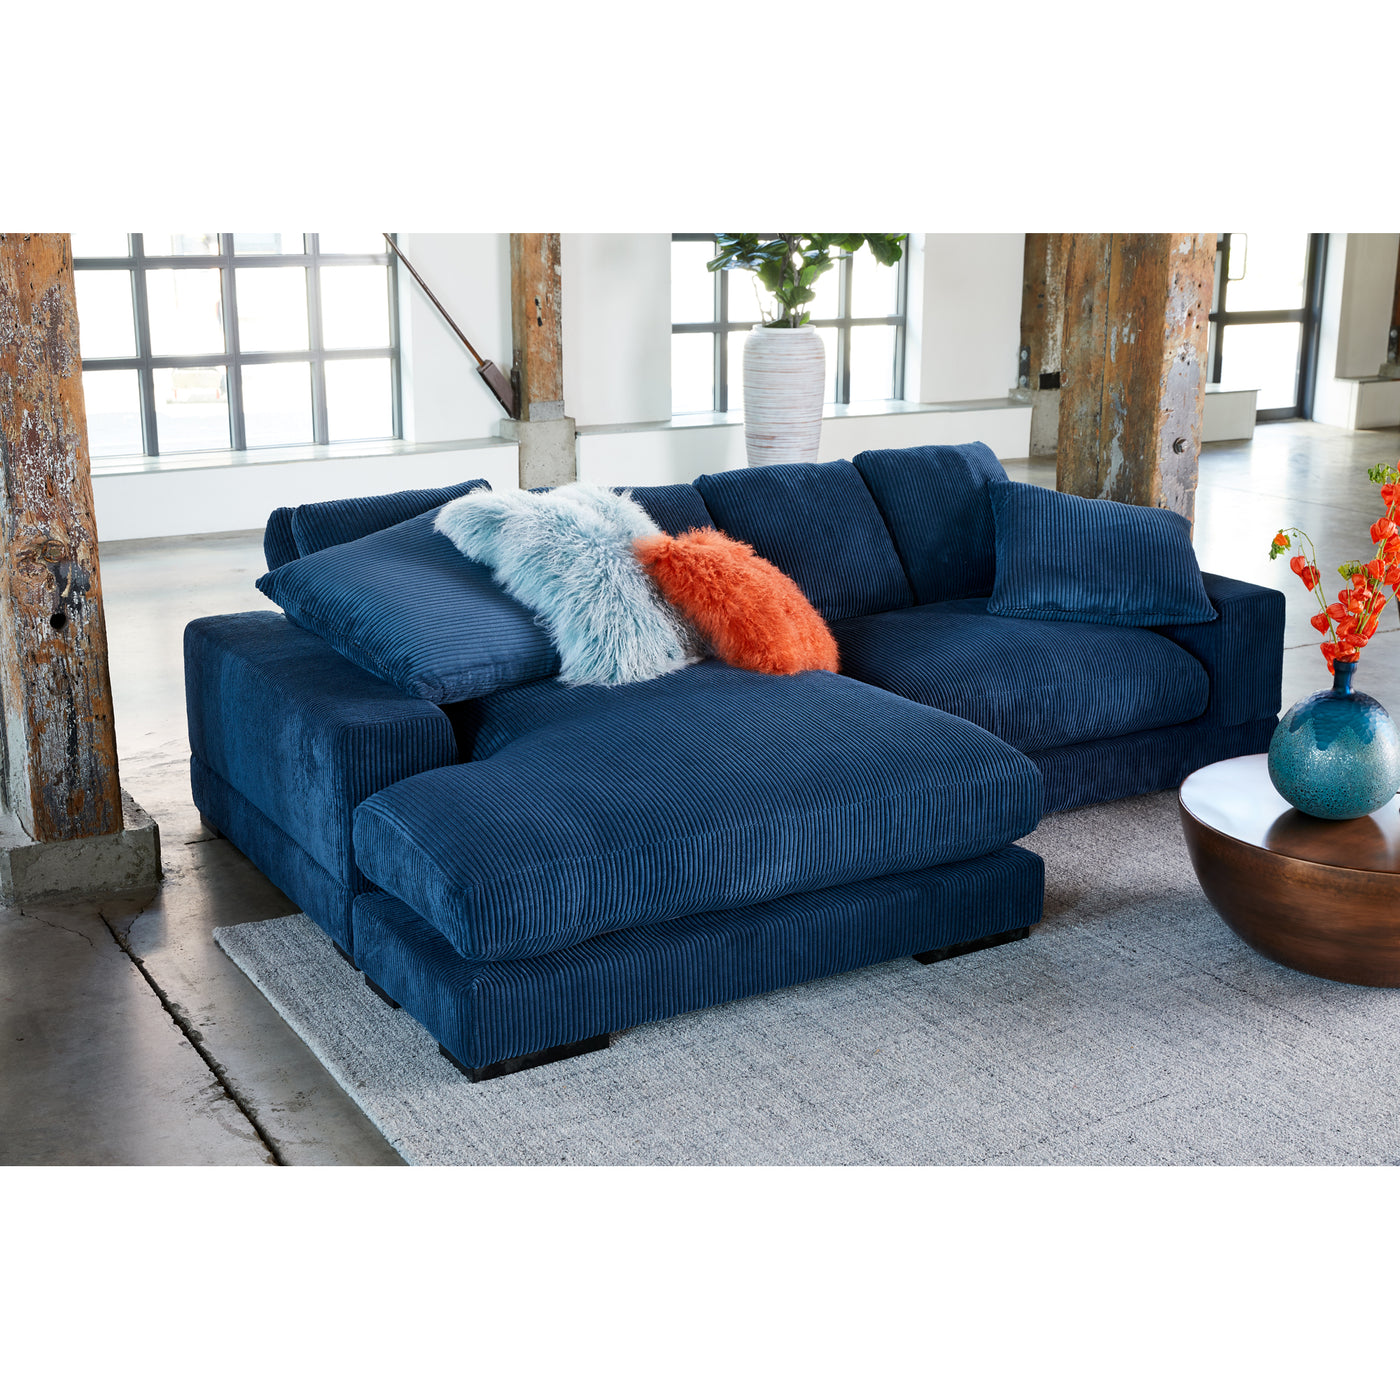 Sink into the luxurious cushions of the Plunge Sofa to experience ultimate comfort and relaxation. Clean lines and soft pi...